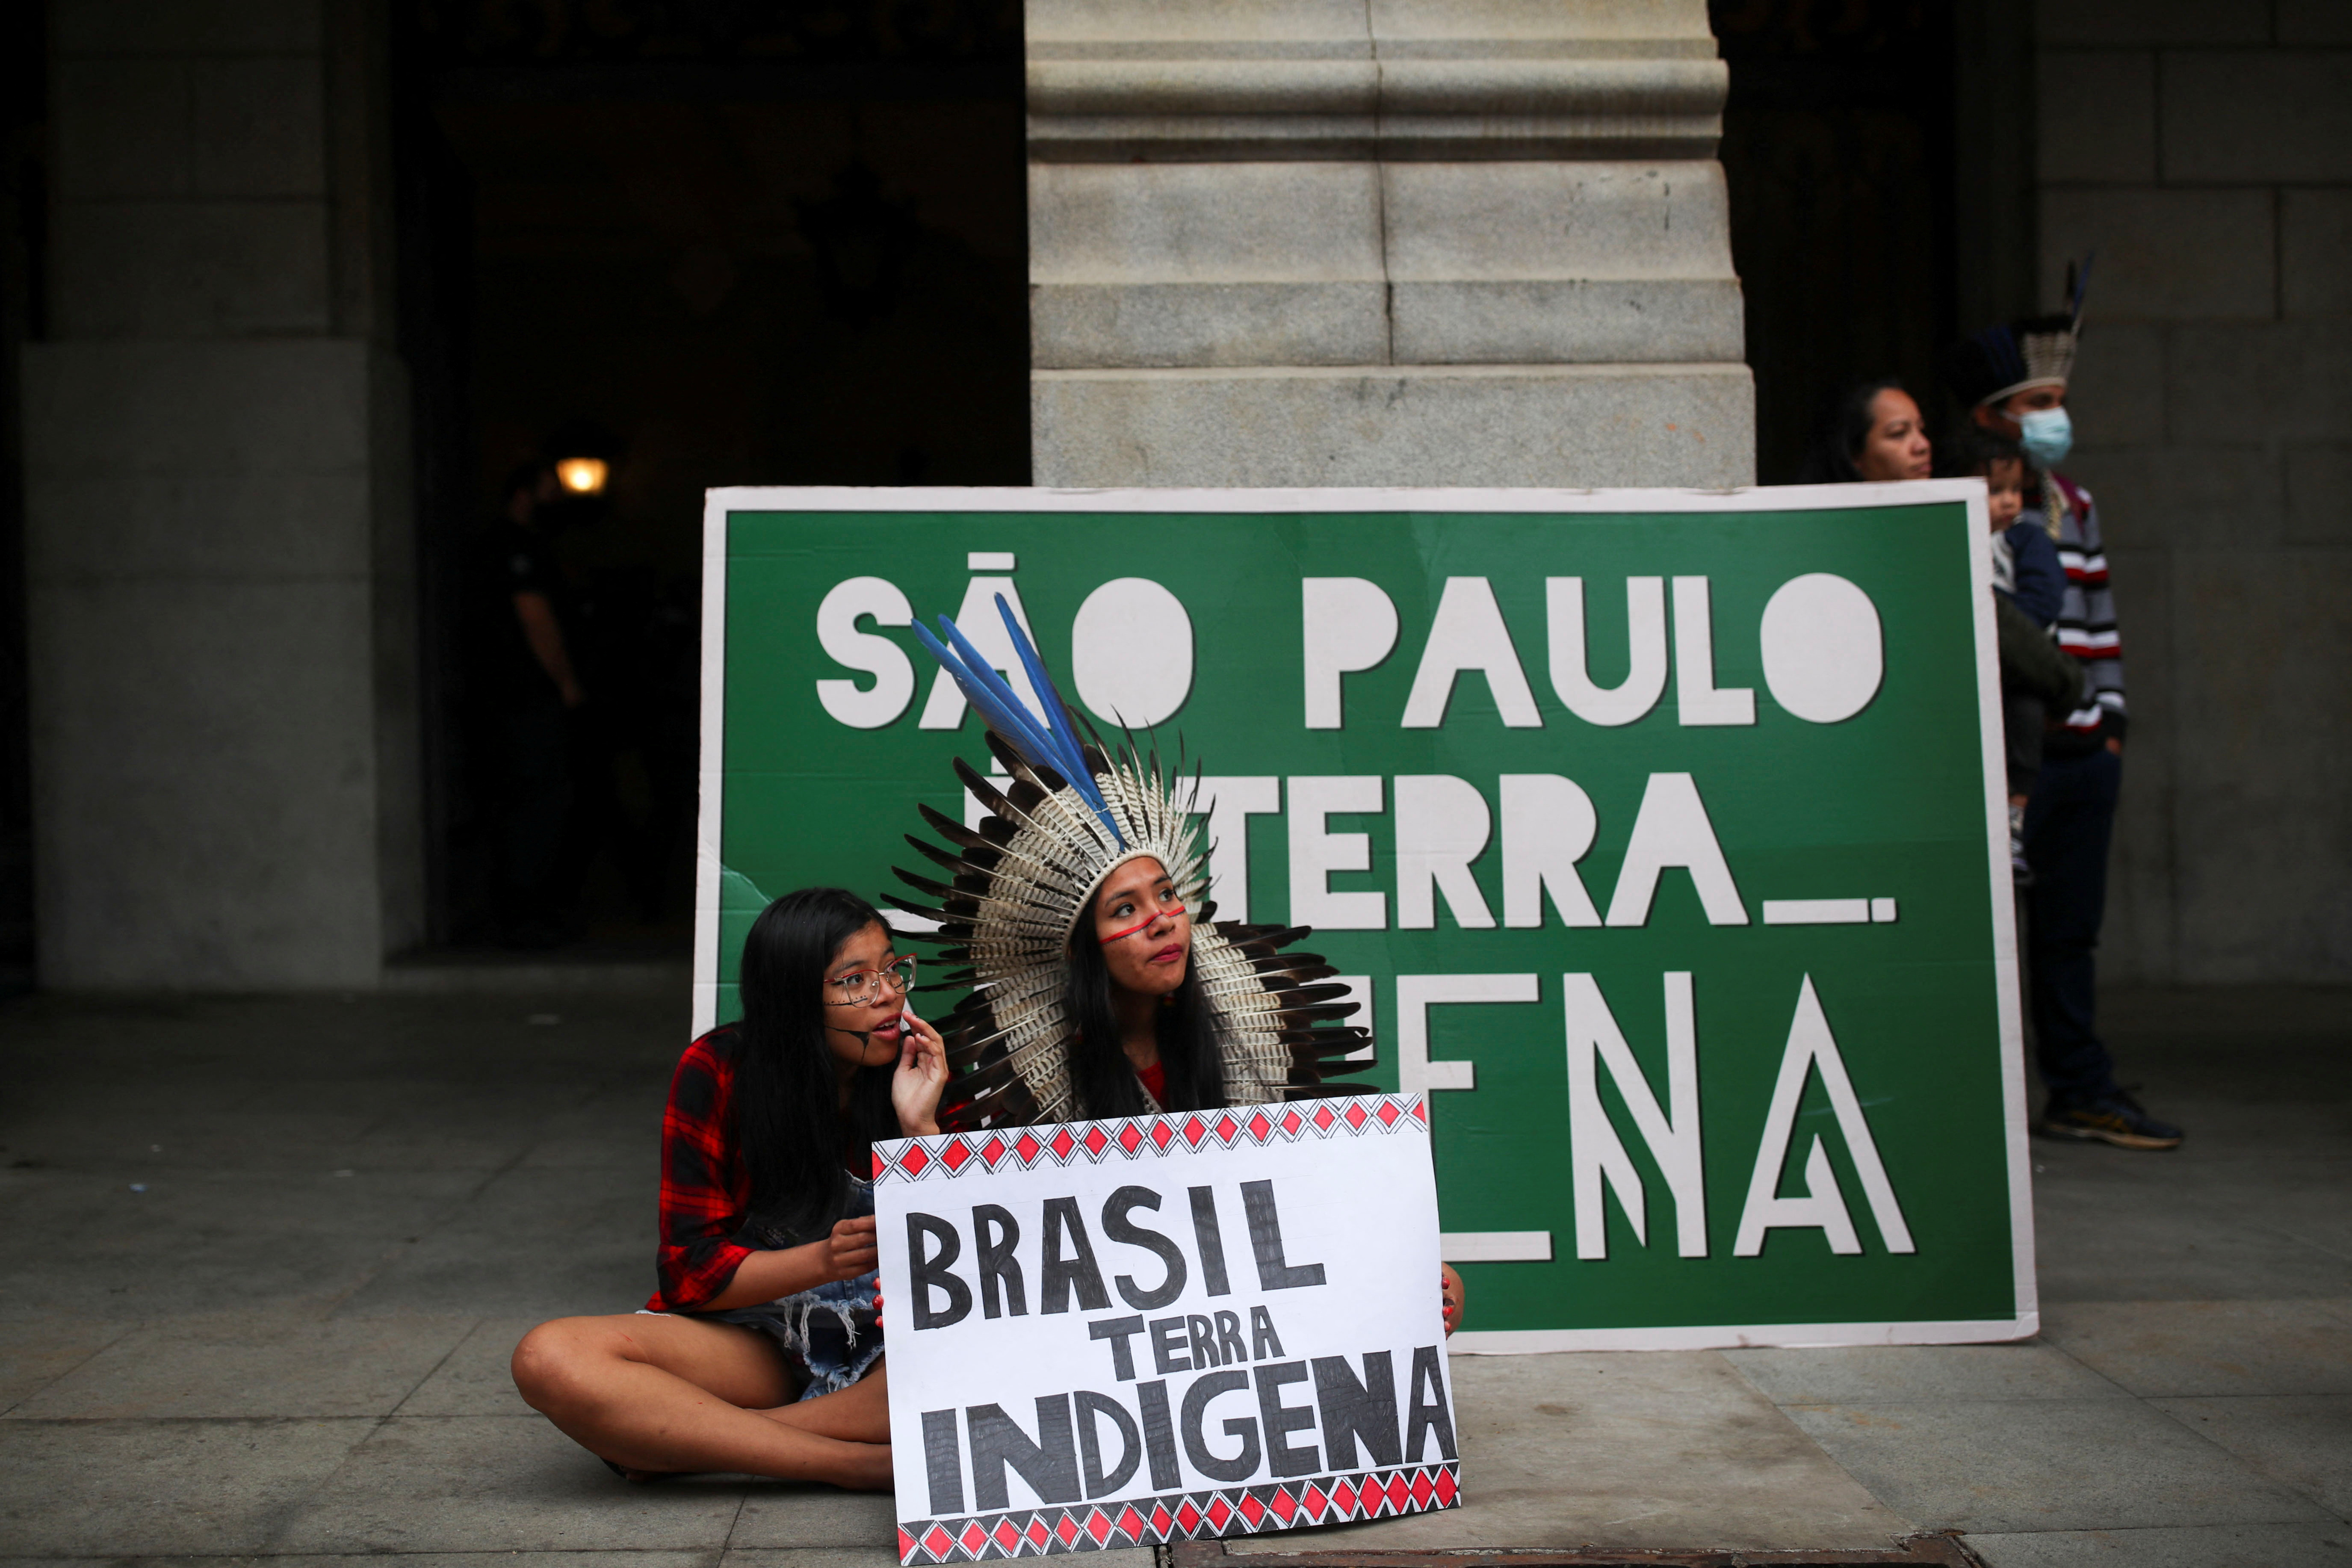 Indigenous people protest during the International Indigenous People Day, in Sao Paulo